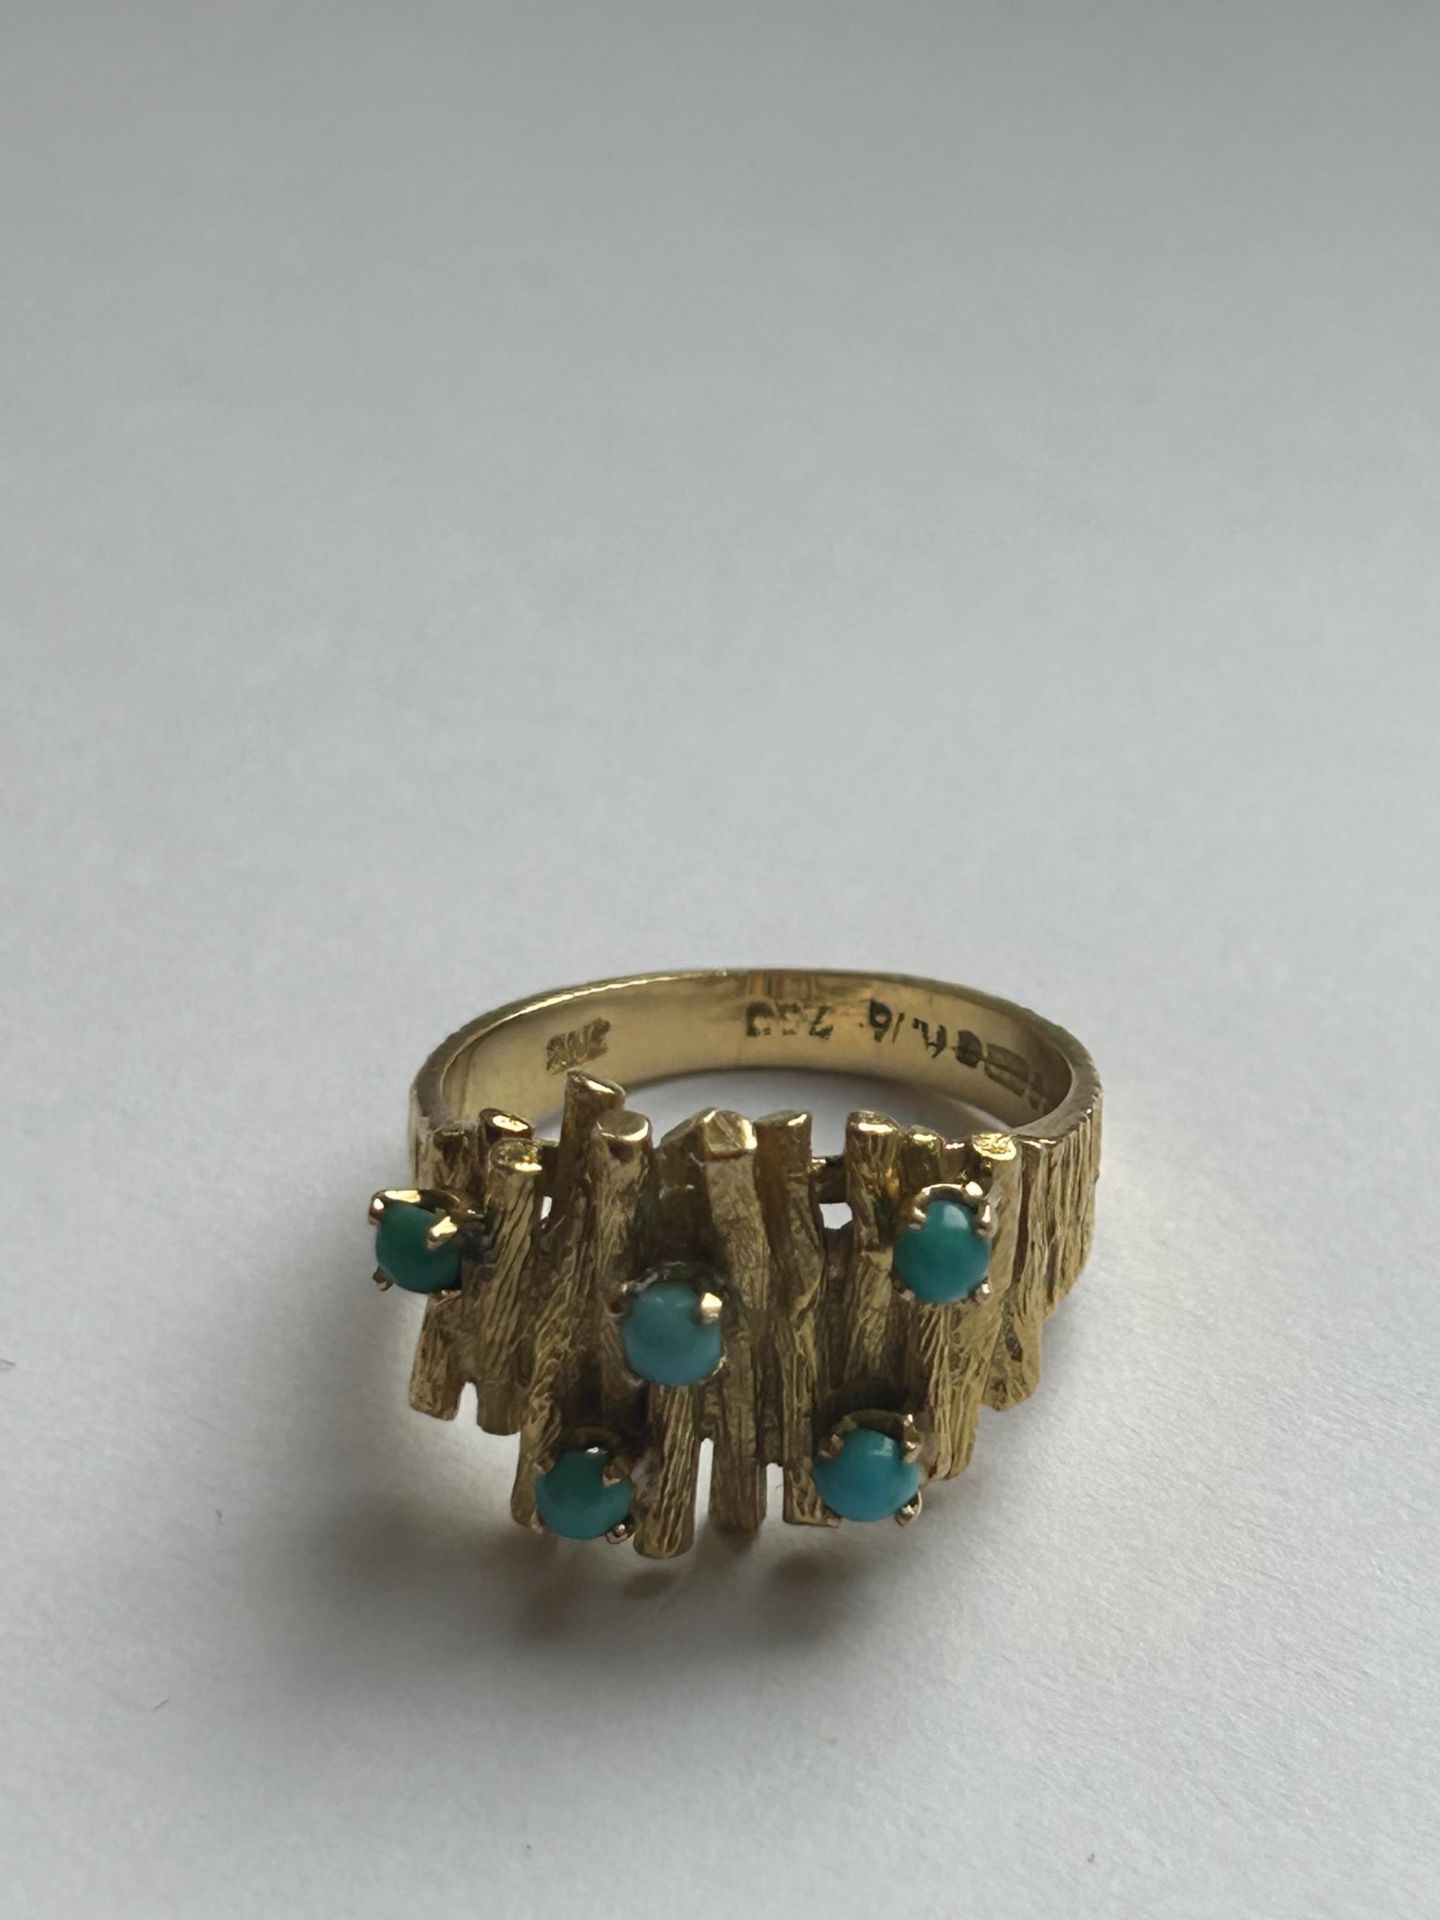 A 9CT YELLOW GOLD AND TURQUOISE STONE RING WITH BARK DESIGN SIZE L, WEIGHT 6.01 GRAMS - Image 2 of 4